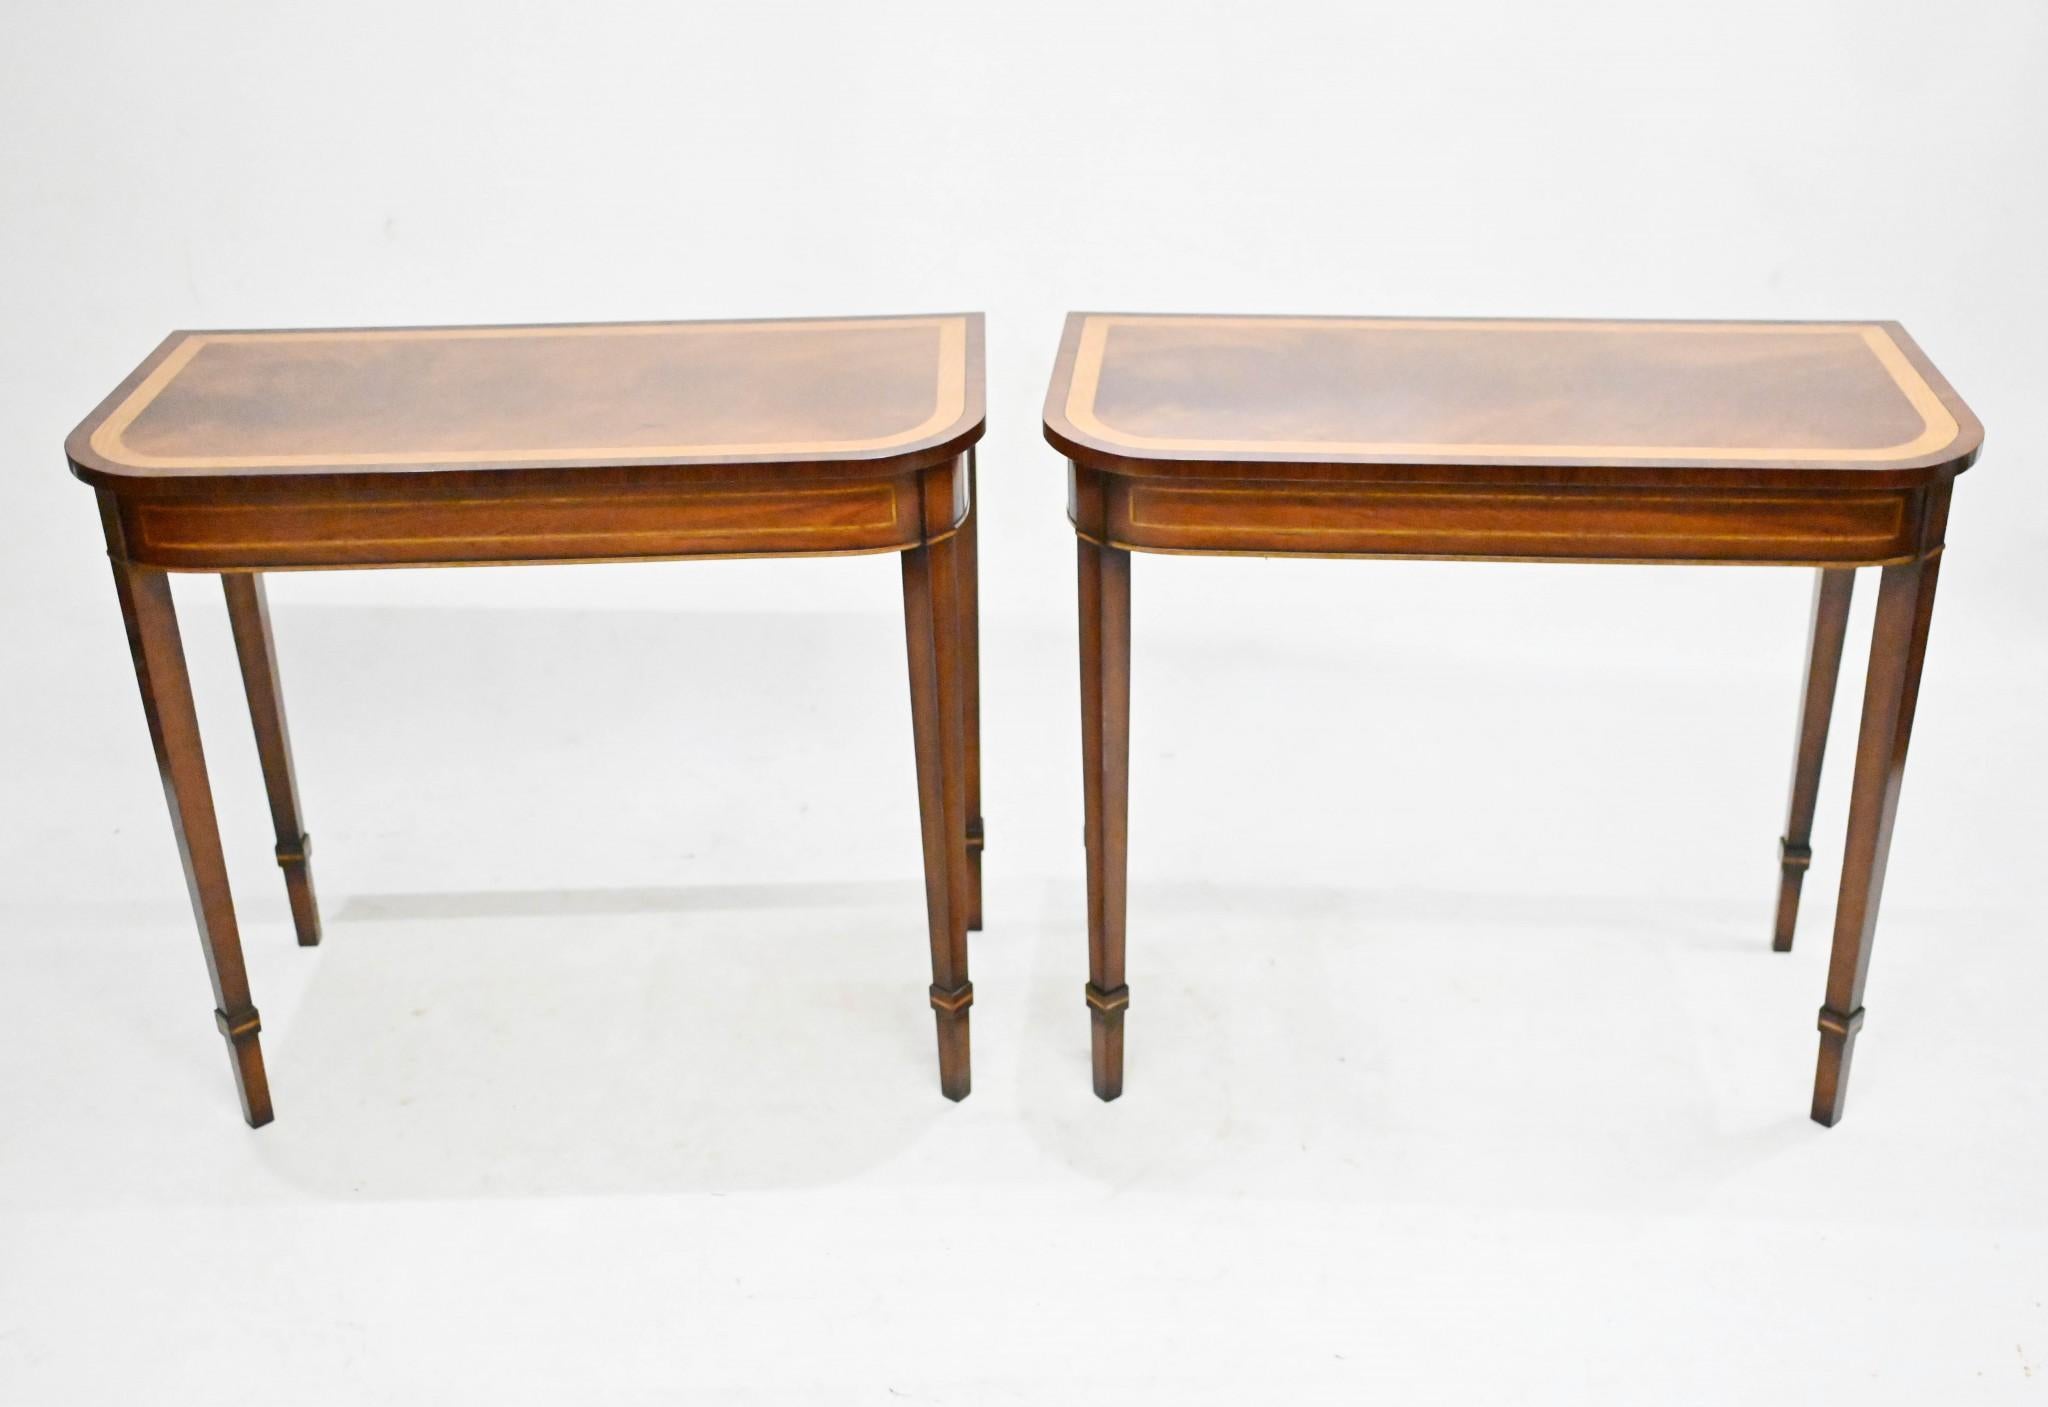 Pair of classic console tables in the Georgian manner
Feature distinctive D ends 
Hand crafted from mahogany with crossbanded tops using satinwood
Classically refined design with tapered legs - perfect for contemporary interiors
Offered in great